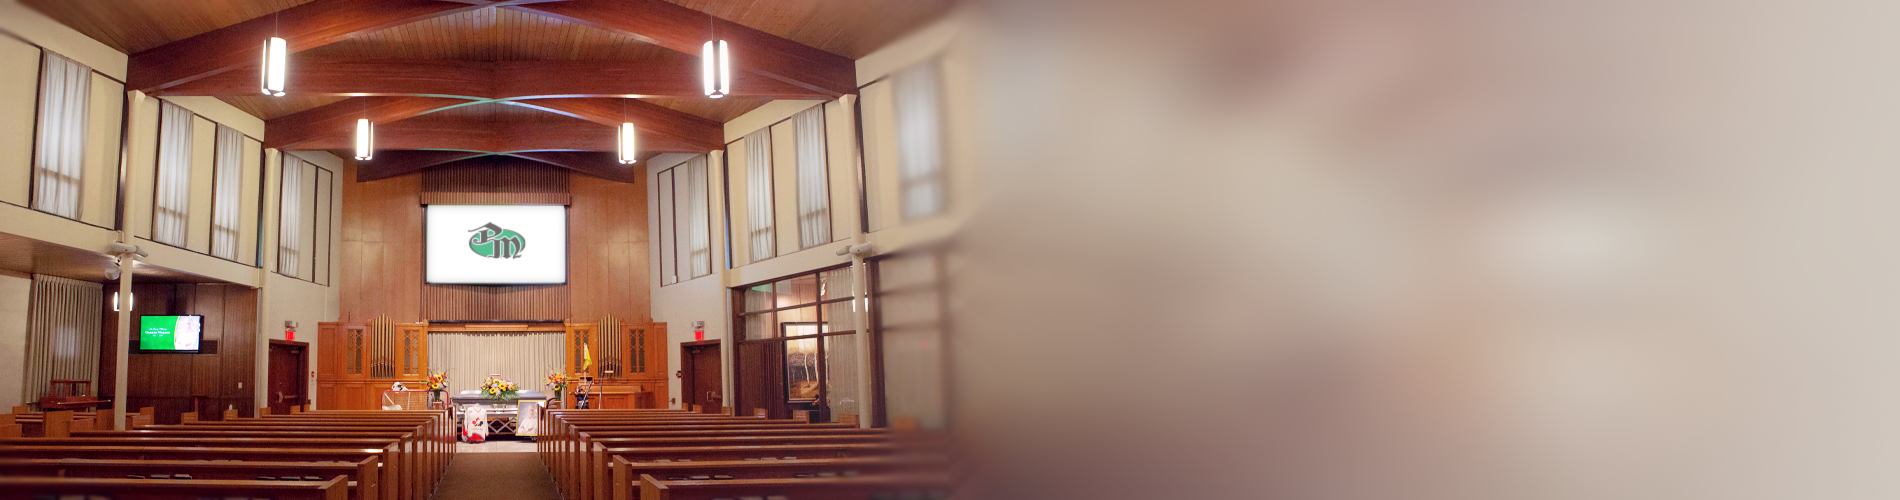 A spacious and naturally lit chapel decorated in hardwood - Park Memorial has the largest naturally lit chapel in Edmonton